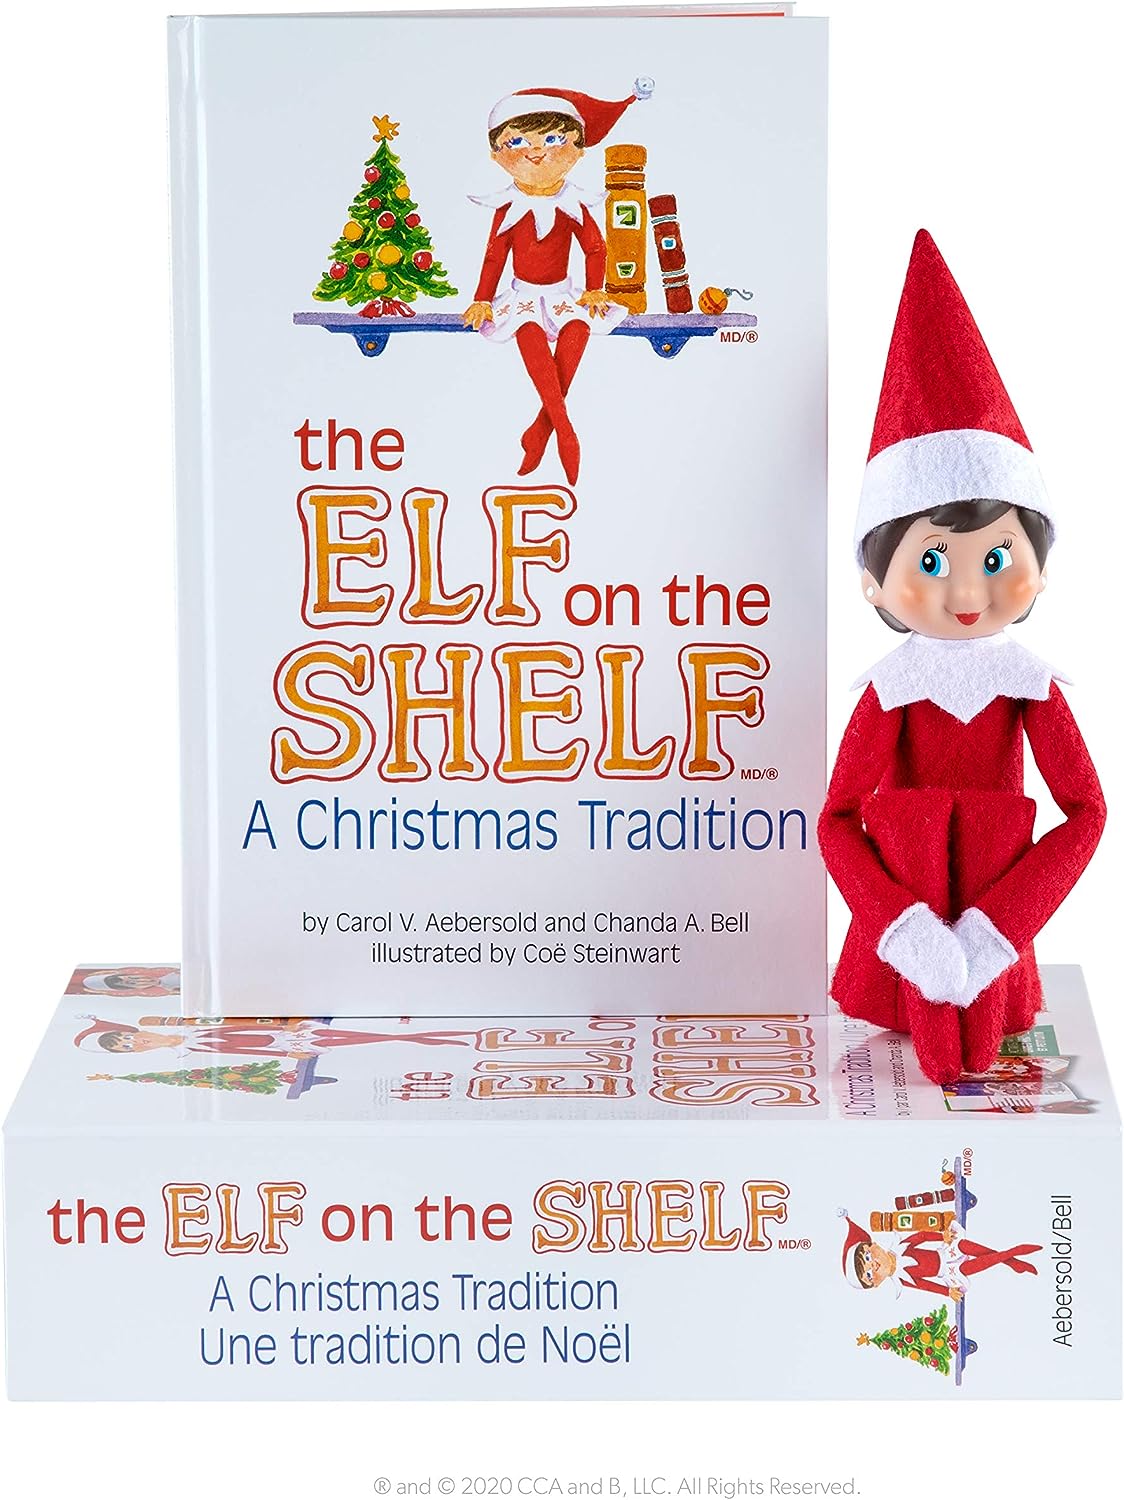 Elf on the Shelf, Elf on the Shelf ideas, Elf on the Shelf names, Elf on the Shelf arrival ideas, Elf on the Shelf printables, Elf on the Shelf story, Elf on the Shelf mischief ideas, Elf on the Shelf letters, Elf on the Shelf accessories, how to do elf on the shelf